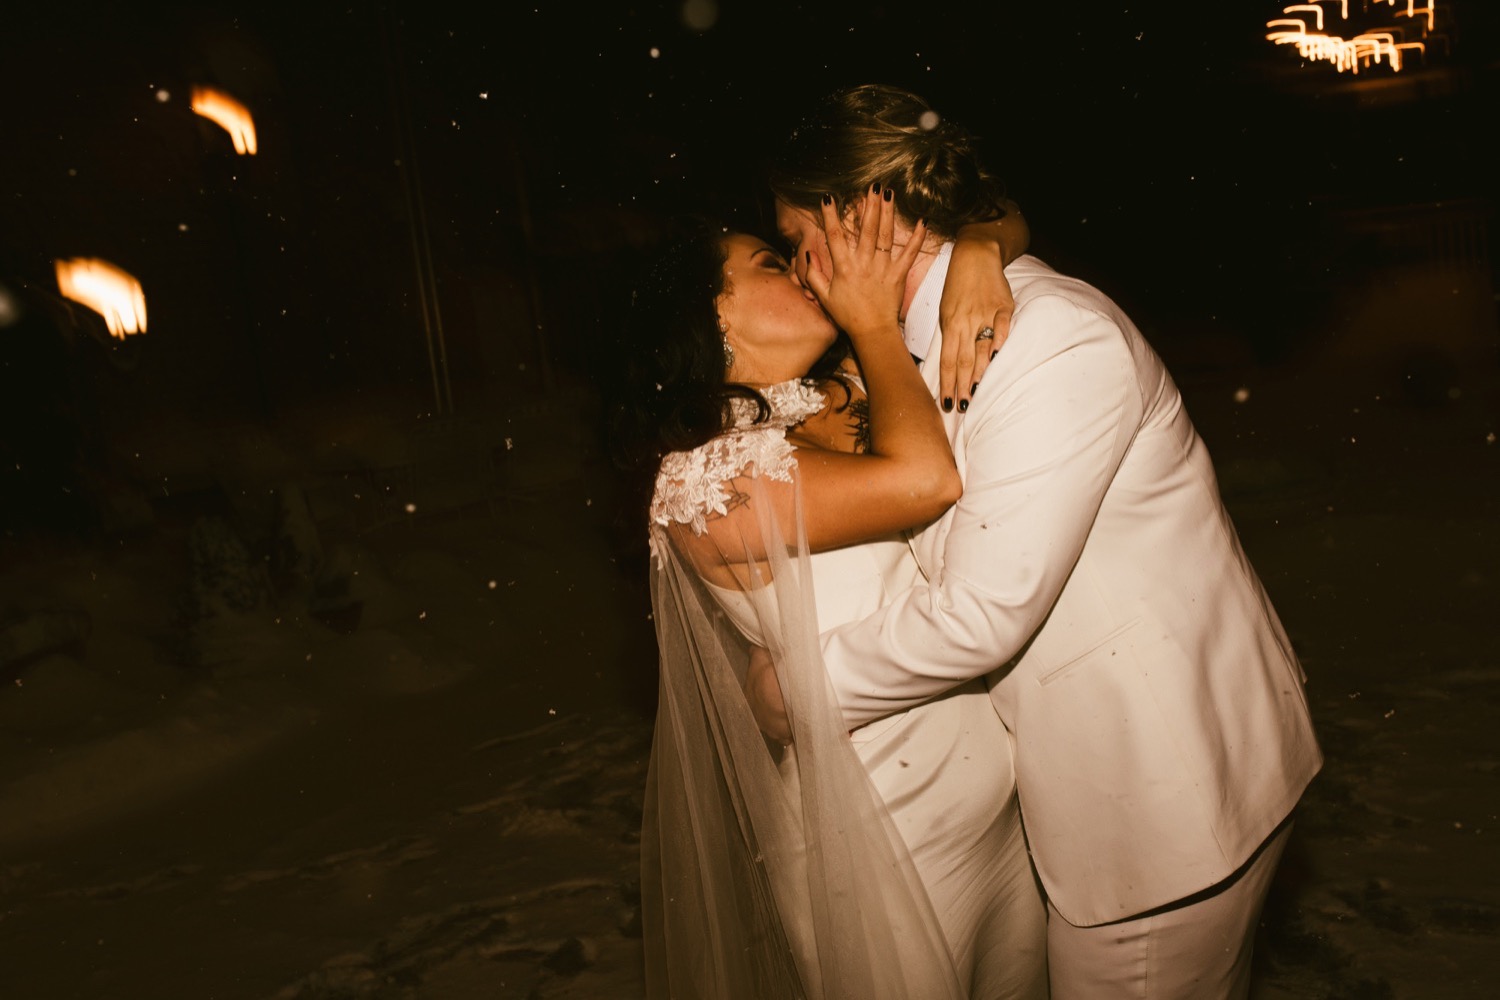 Chicago wedding reception snowy night - couple dancing and hugging.